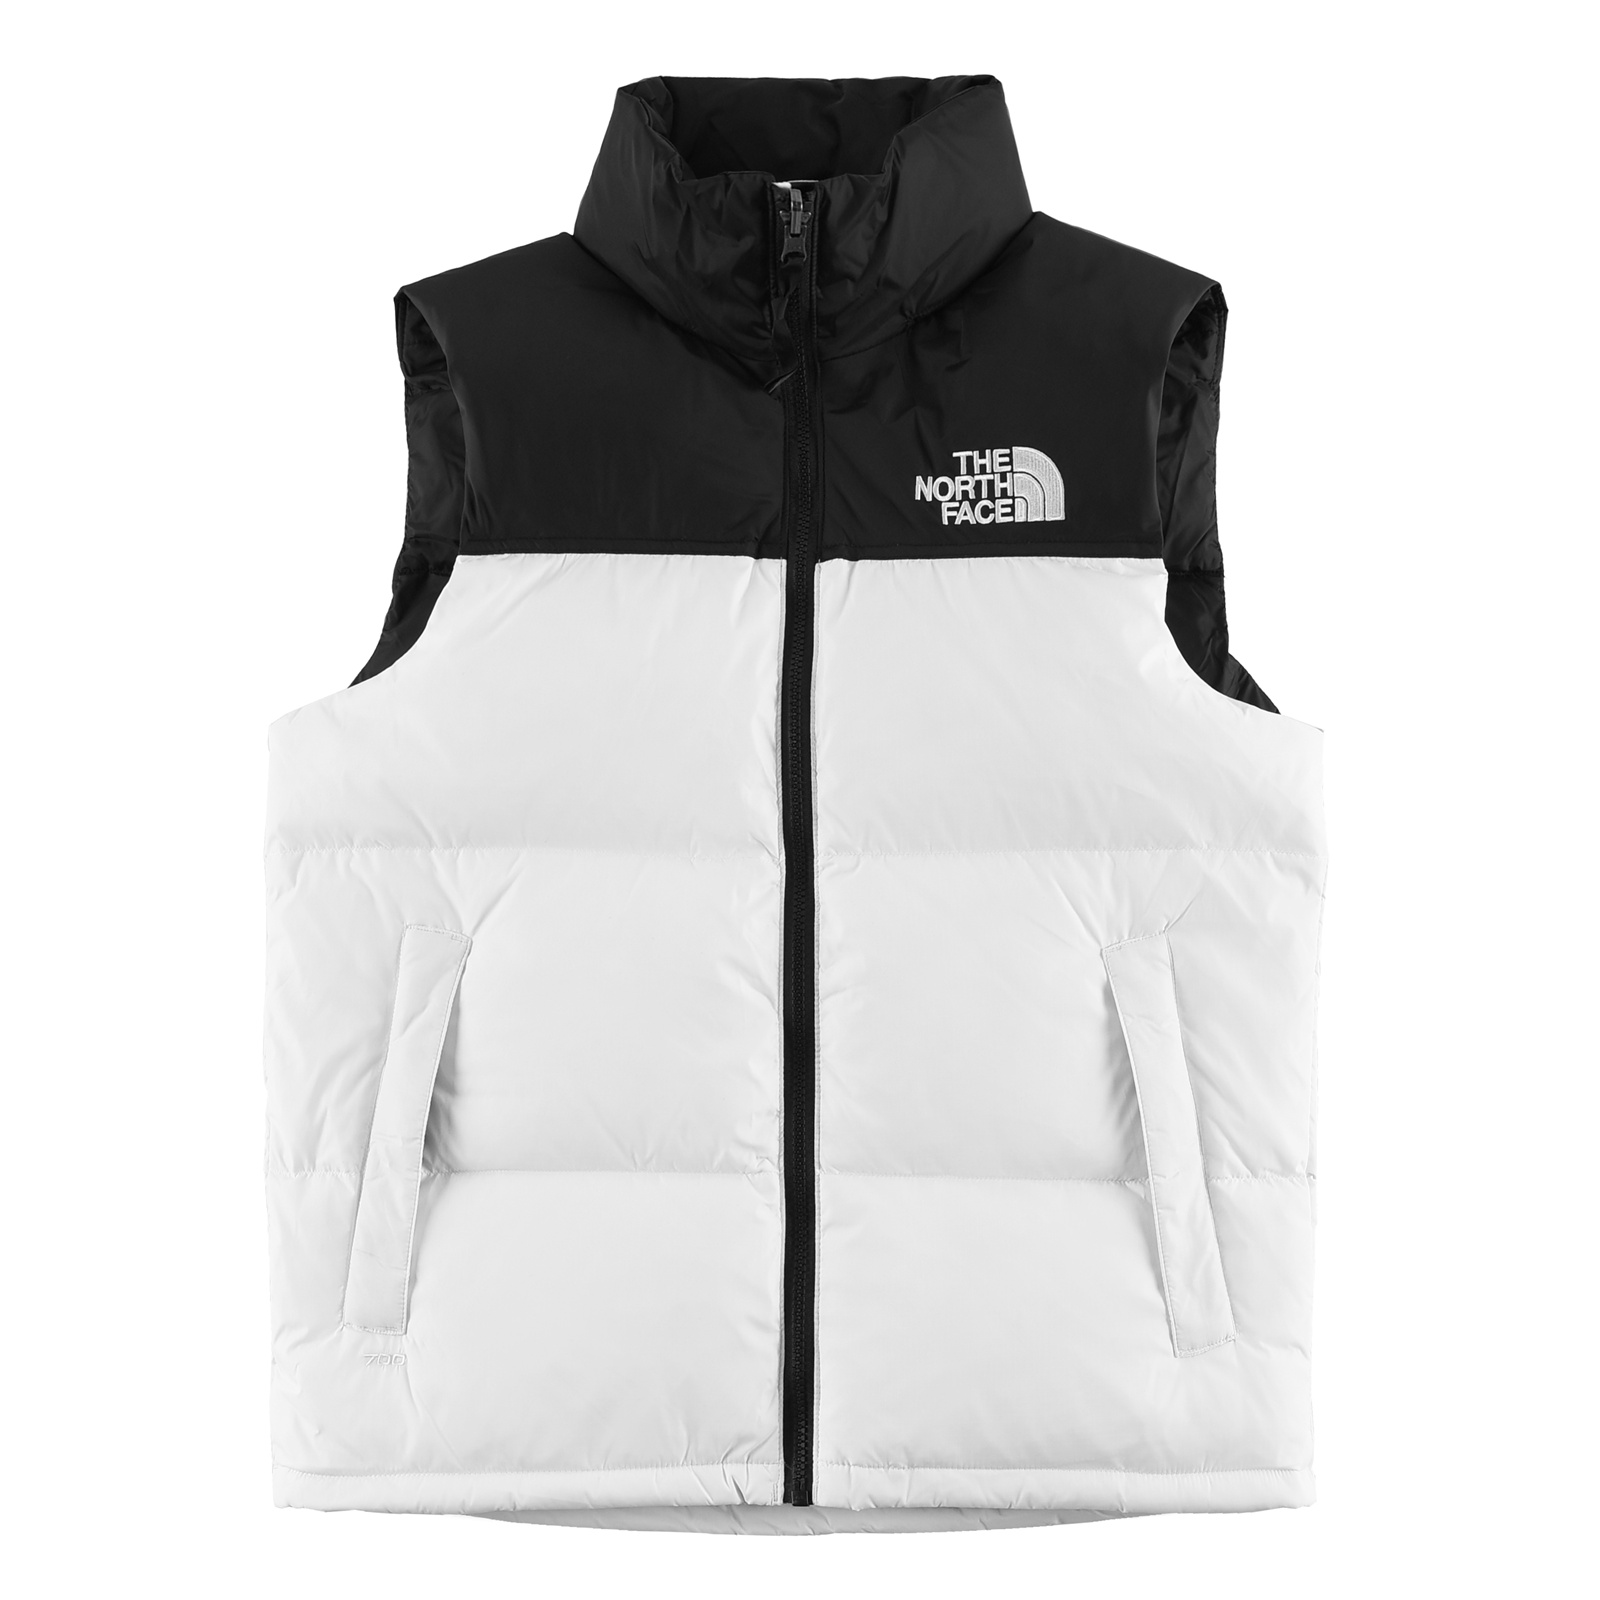 The North Face Clothing Waistcoat White Embroidery Unisex Duck Down